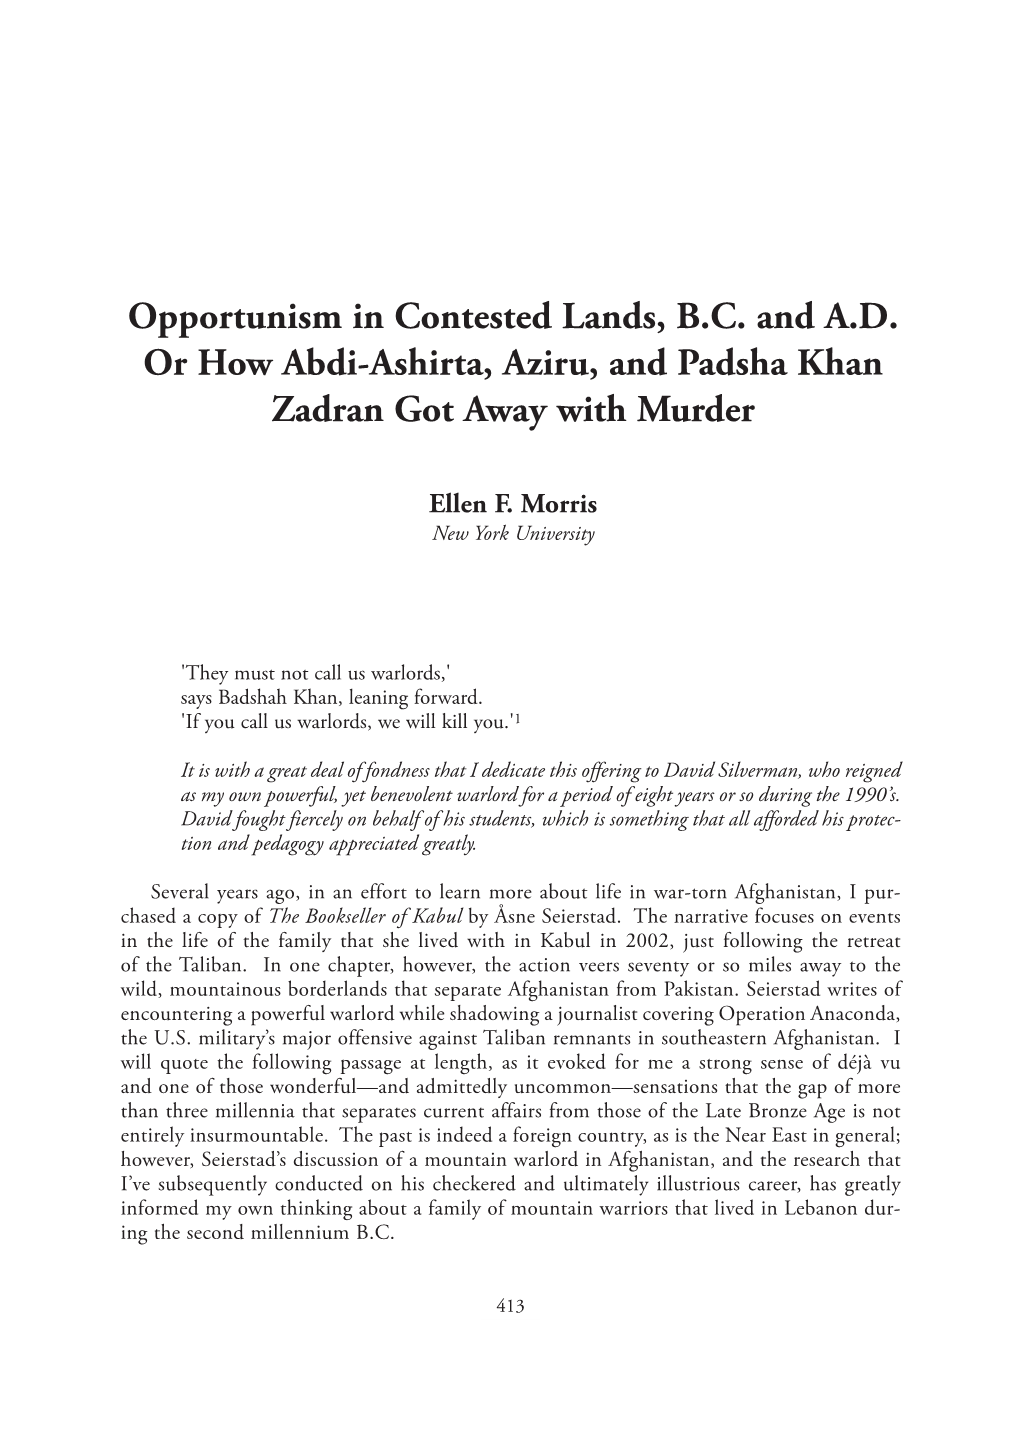 Opportunism in Contested Lands, B.C. and A.D. Or How Abdi-Ashirta, Aziru, and Padsha Khan Zadran Got Away with Murder